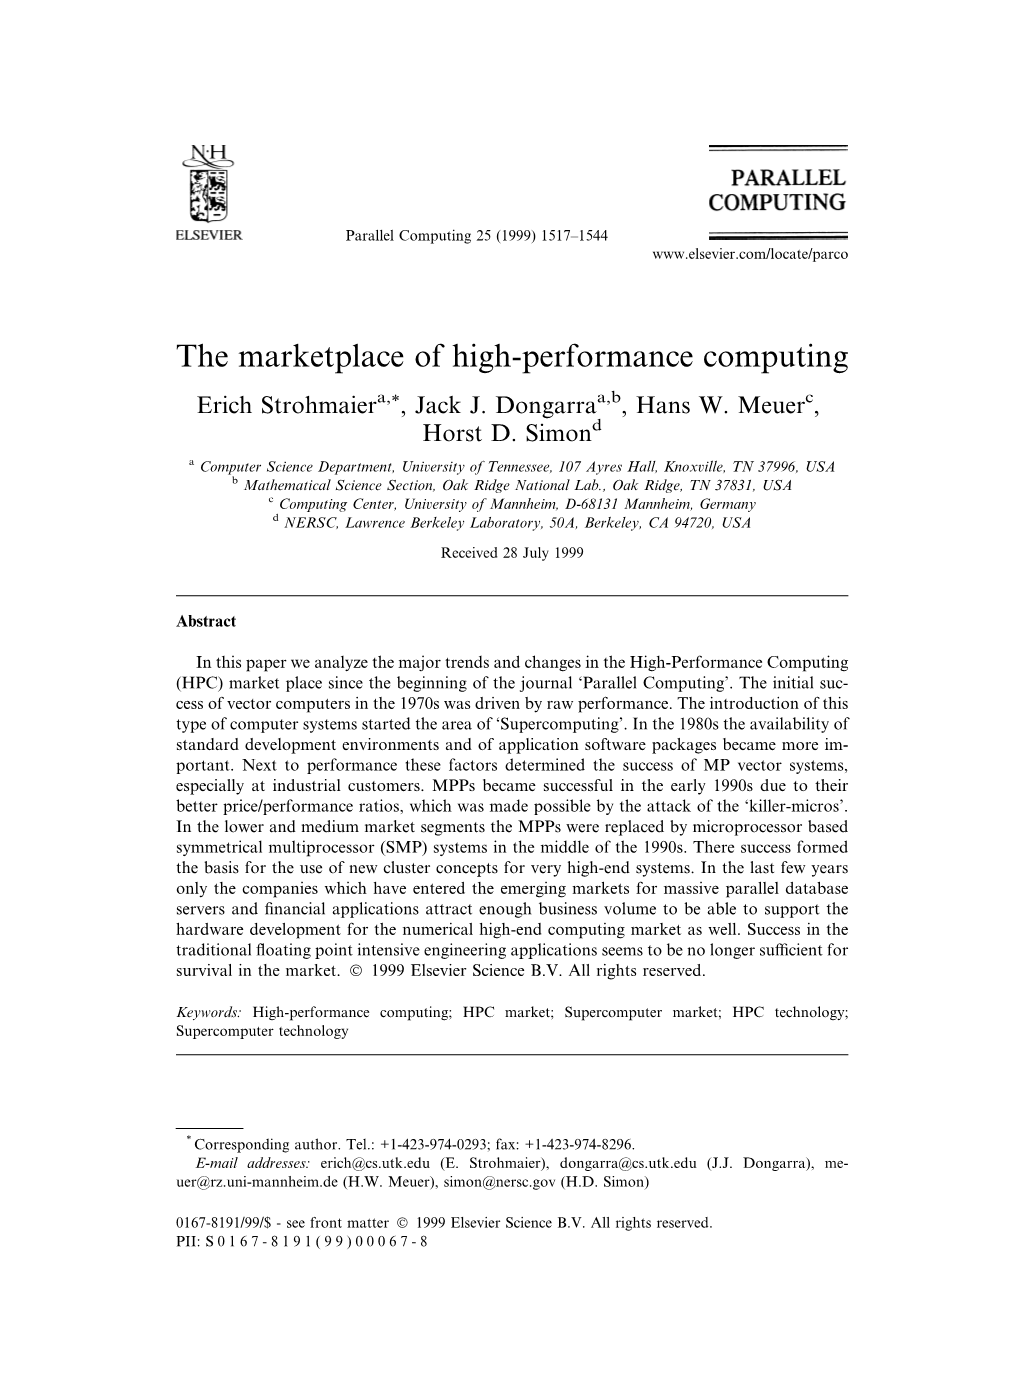 The Marketplace of High-Performance Computing